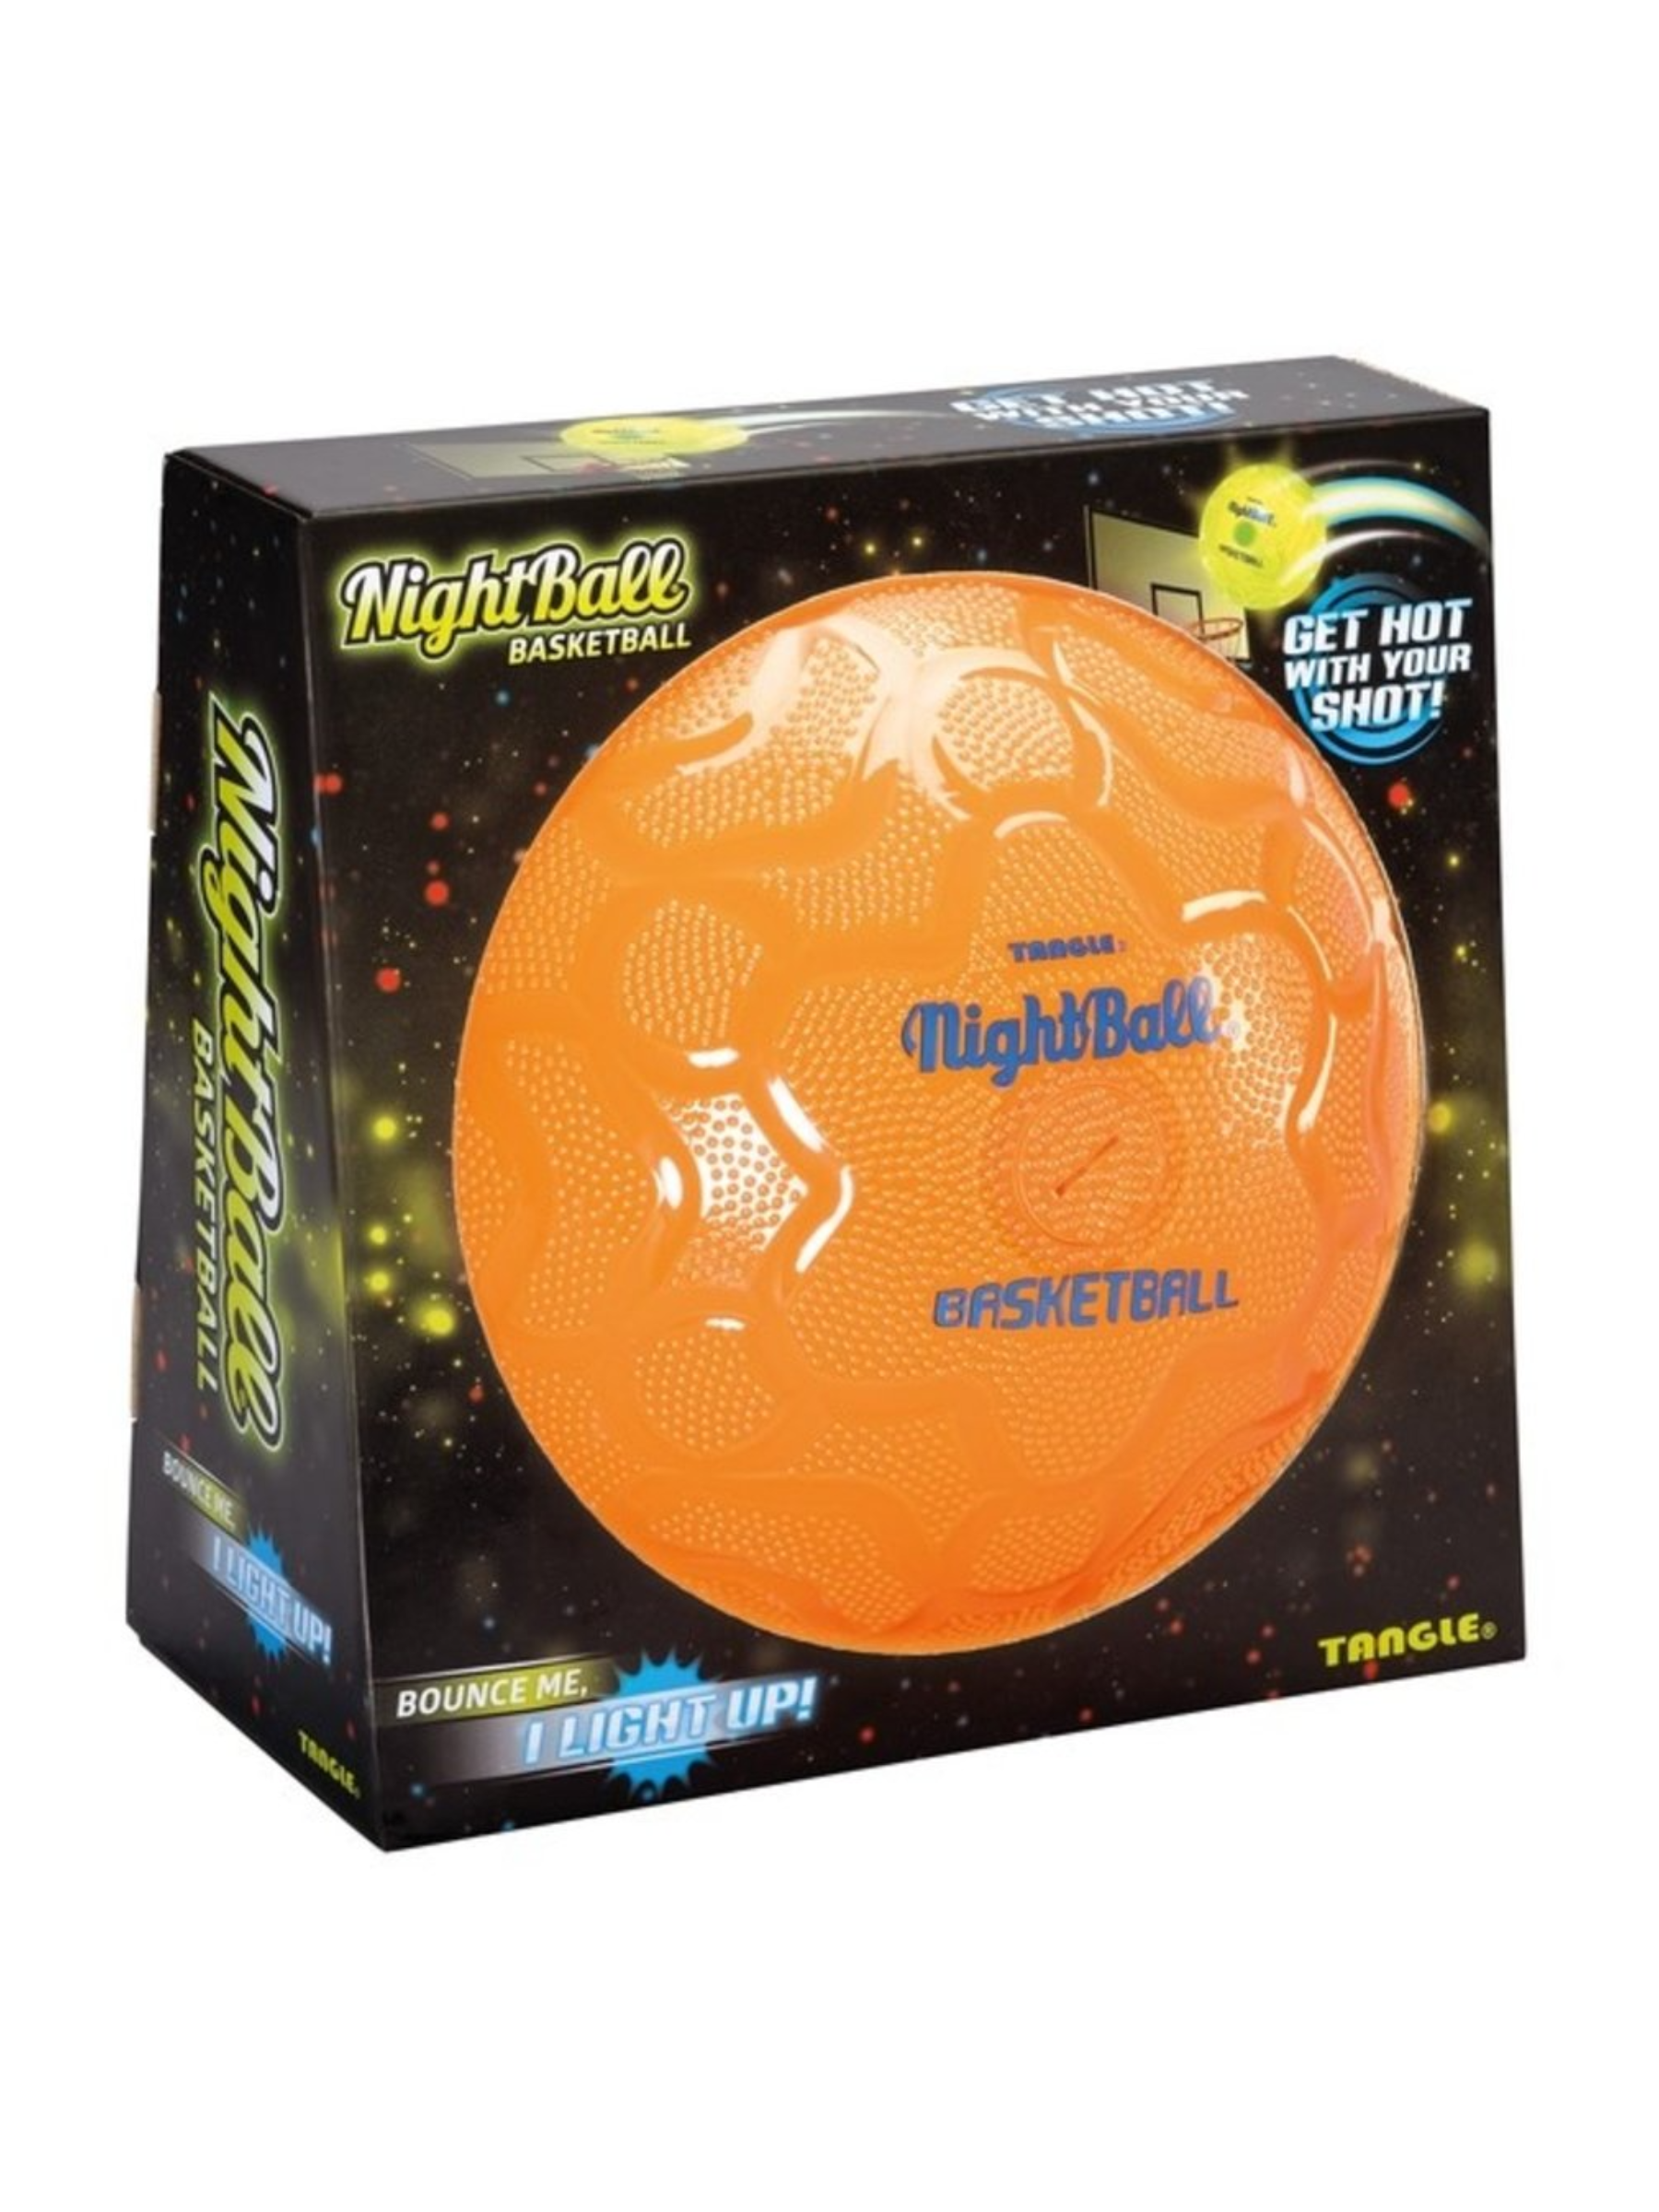 They can practice their handle any time of day with this illuminated basketball that gets brighter as it bounces. $25, Nordstrom. <a href="https://www.nordstrom.com/s/tangle-nightball-basketball/4365839?">Get it now!</a><p>Sign up for today’s biggest stories, from pop culture to politics.</p><a href="https://www.glamour.com/newsletter/news?sourceCode=msnsend">Sign Up</a>